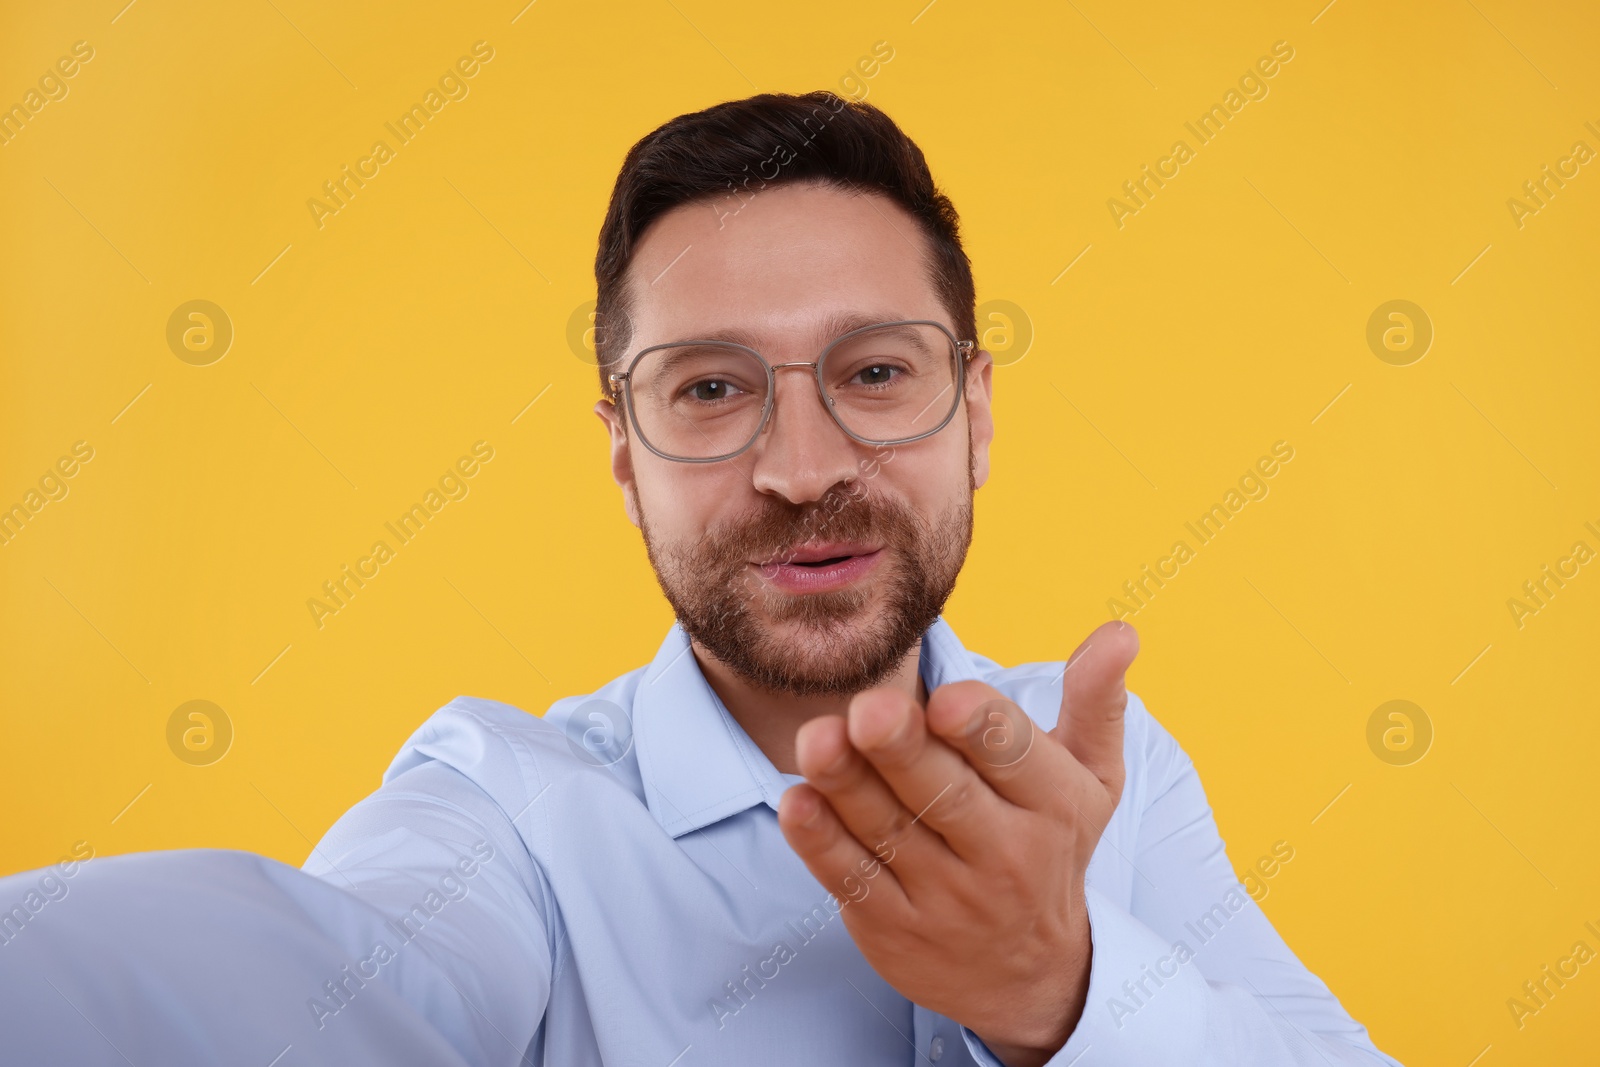 Photo of Man taking selfie and blowing kiss on yellow background